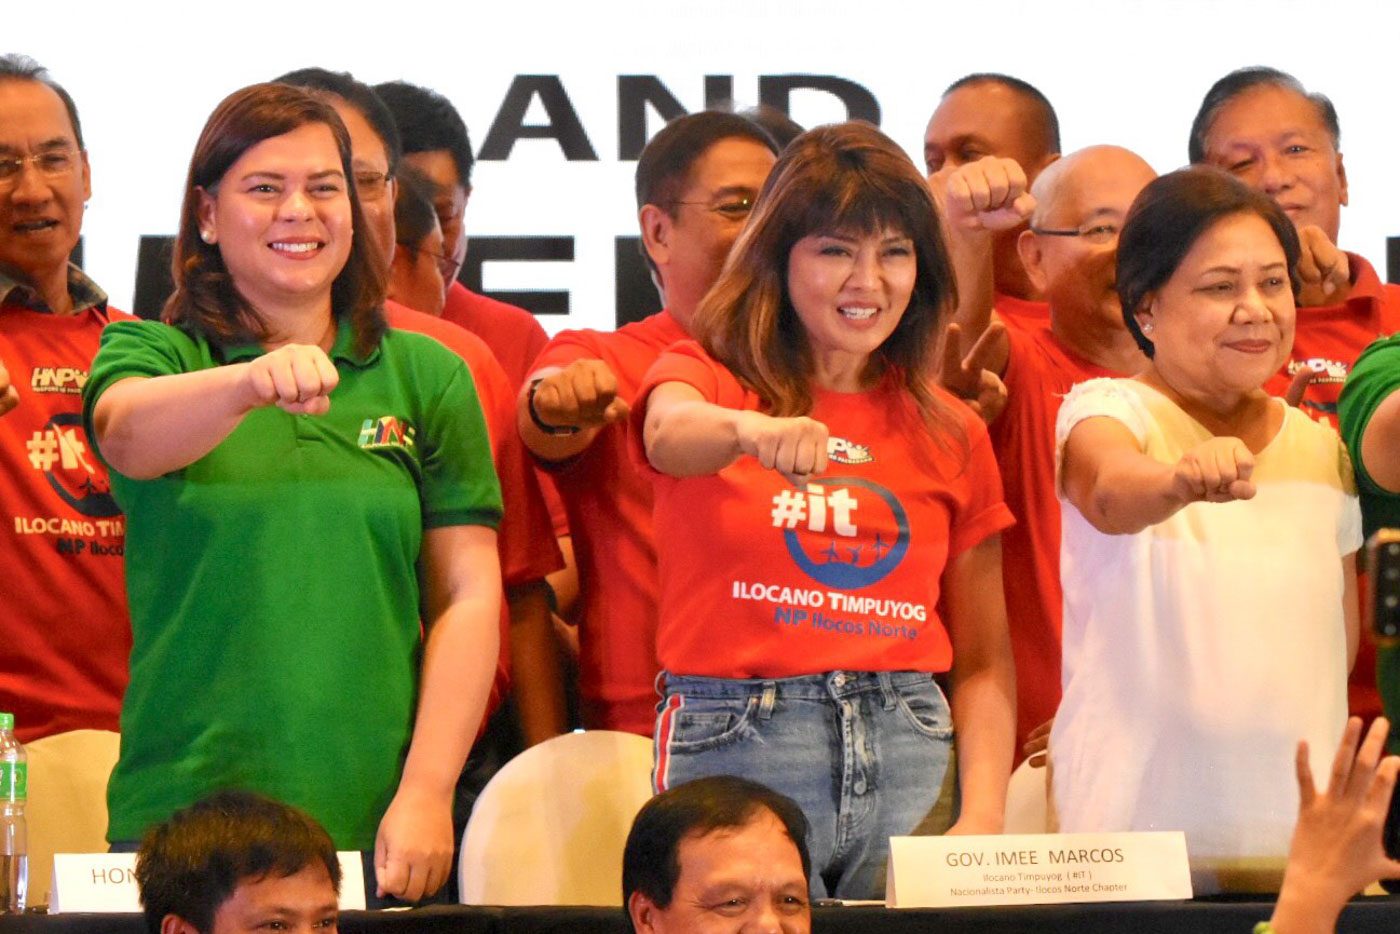 PACT. Ilocos Norte Governor Imee Marcos (center) joins Davao City Mayor Sara Duterte Carpio (left) regional party Hugpong ng Pagbabago on August 13, 2018. Photo by Angie de Silva/Rappler  